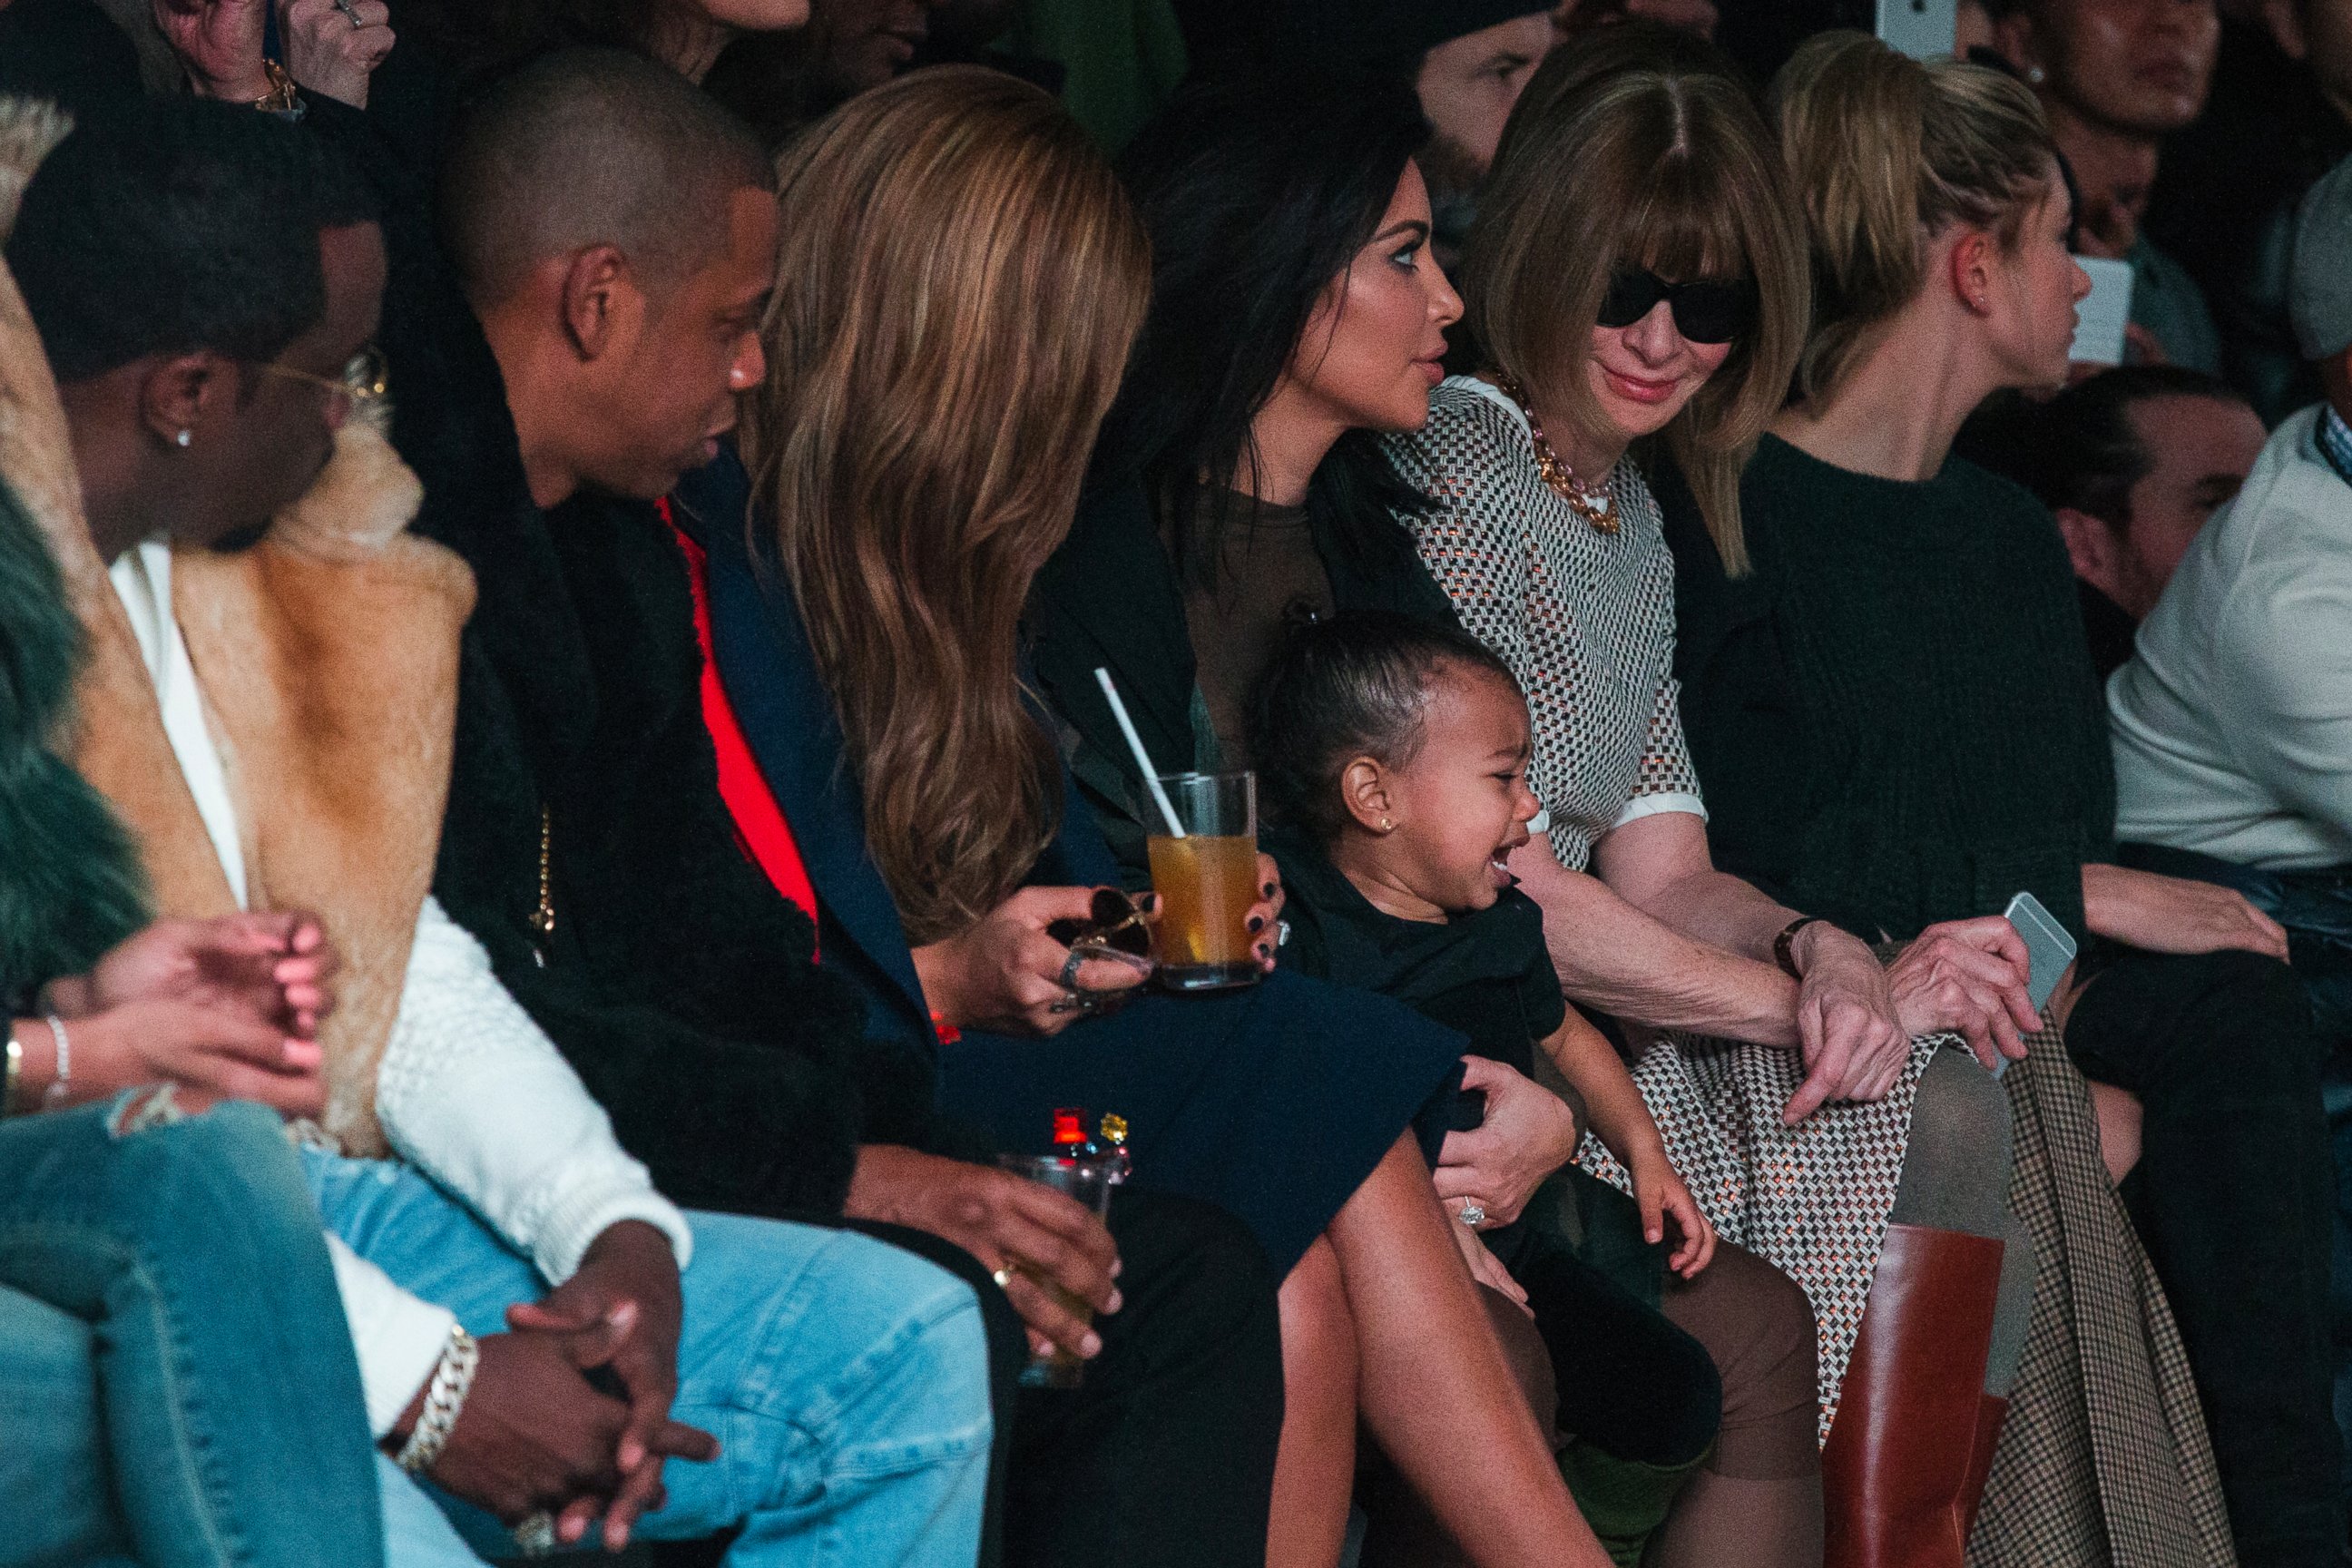 PHOTO: Kim Kardashian attempts to calm her daughter, North, while sitting next to Sean Combs  Jay-Z  Beyonce  and Anna Wintour as they watch a presentation of Kanye West's Fall/Winter 2015 partnership with Adidas at New York Fashion Week, Feb 12, 2015.